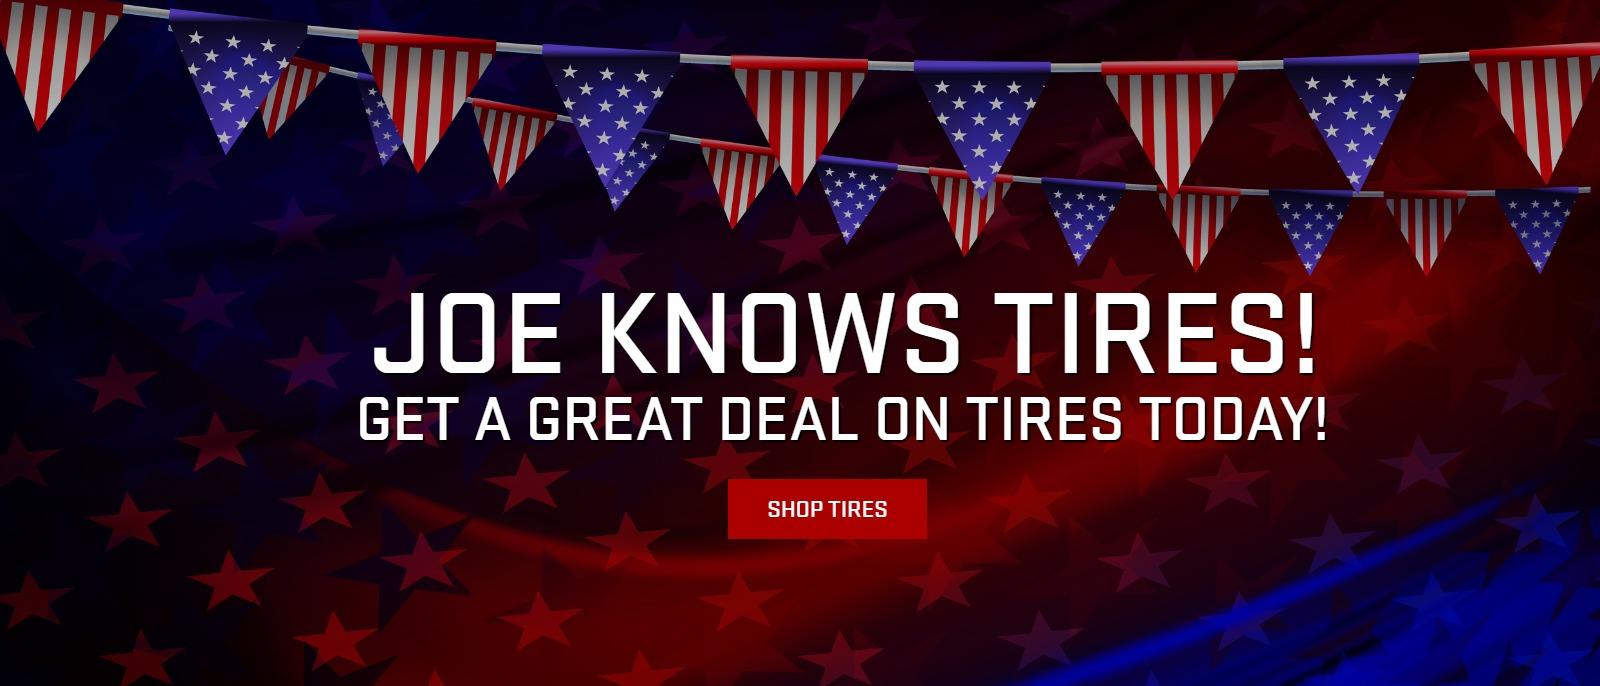 Joe Knows Tires! Get a great deal on tires today!